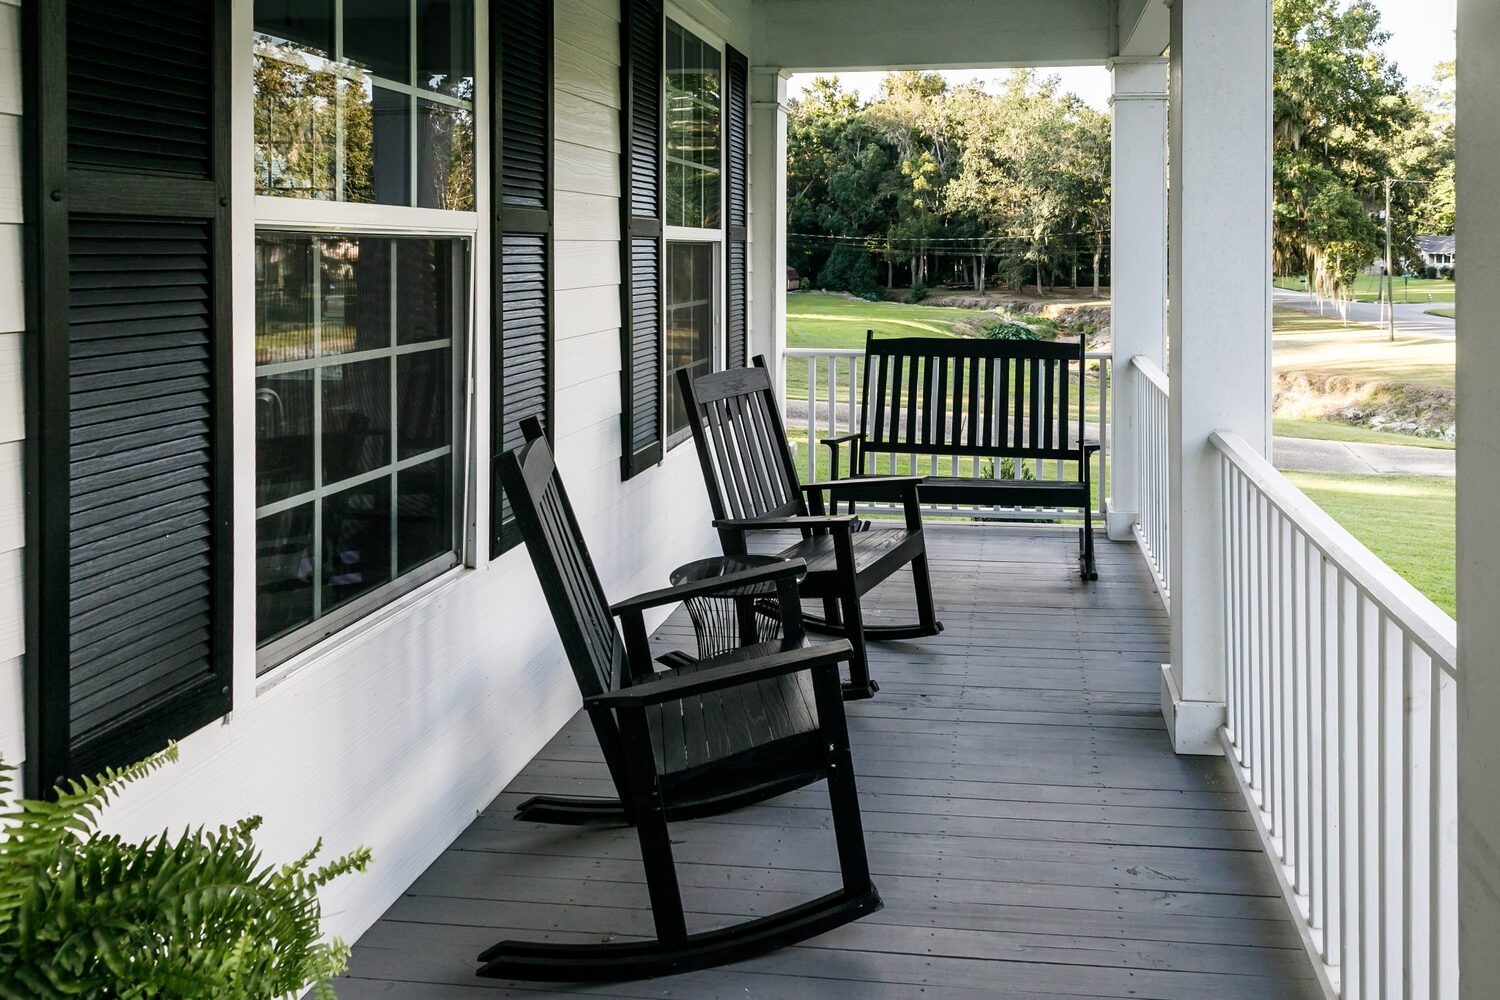 Dedication to excellence reflected in the beautiful white wooden porch made by porch builders Glencoe based